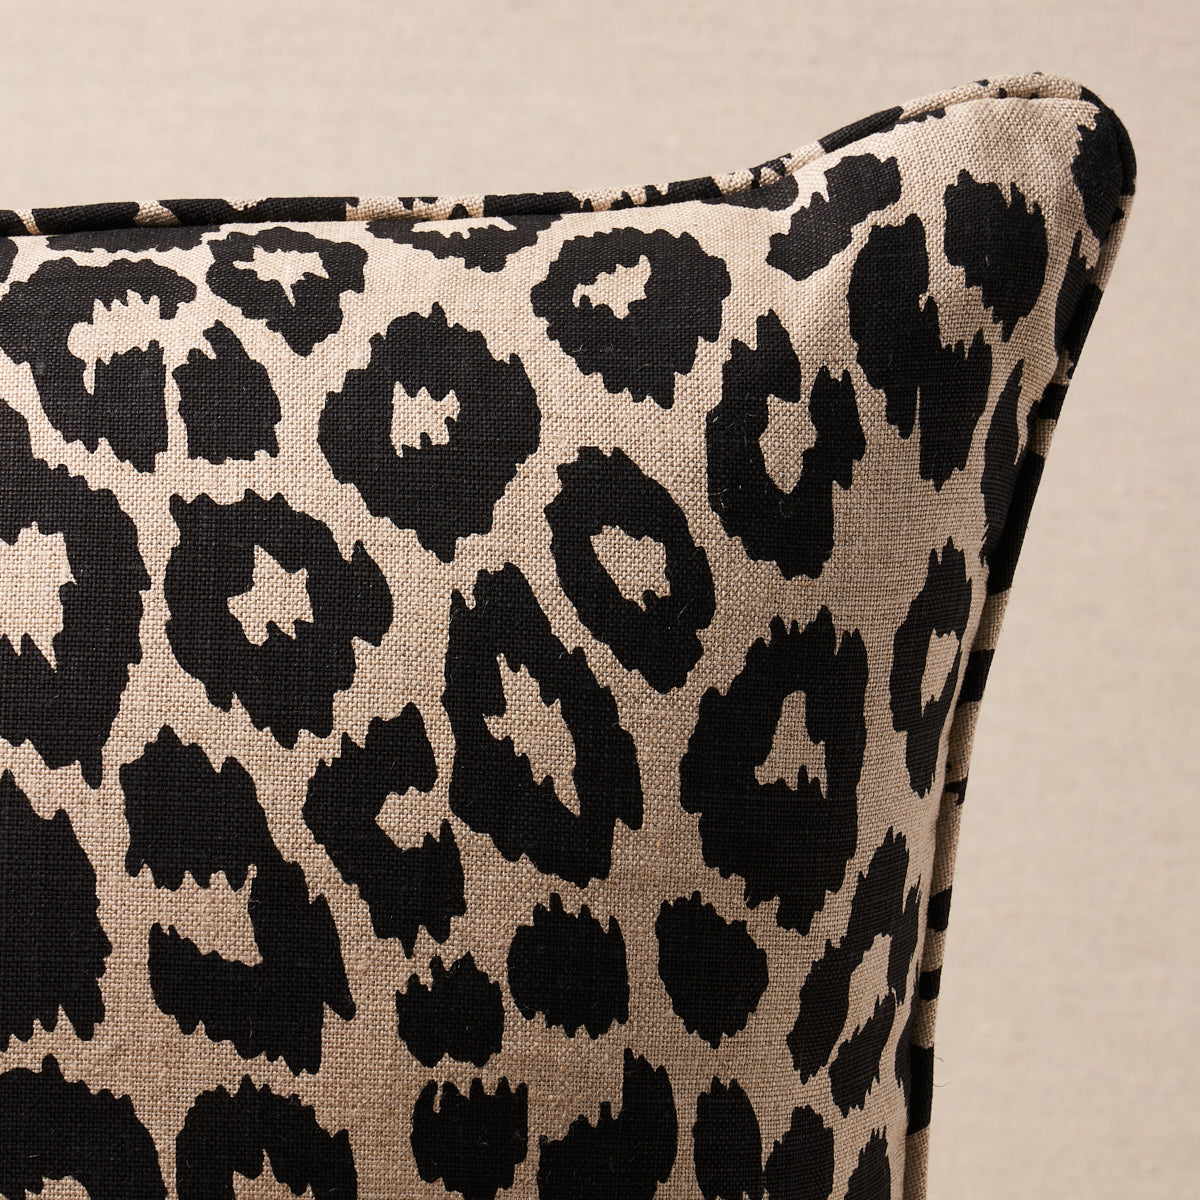 Iconic Leopard Pillow | Ebony/Natural